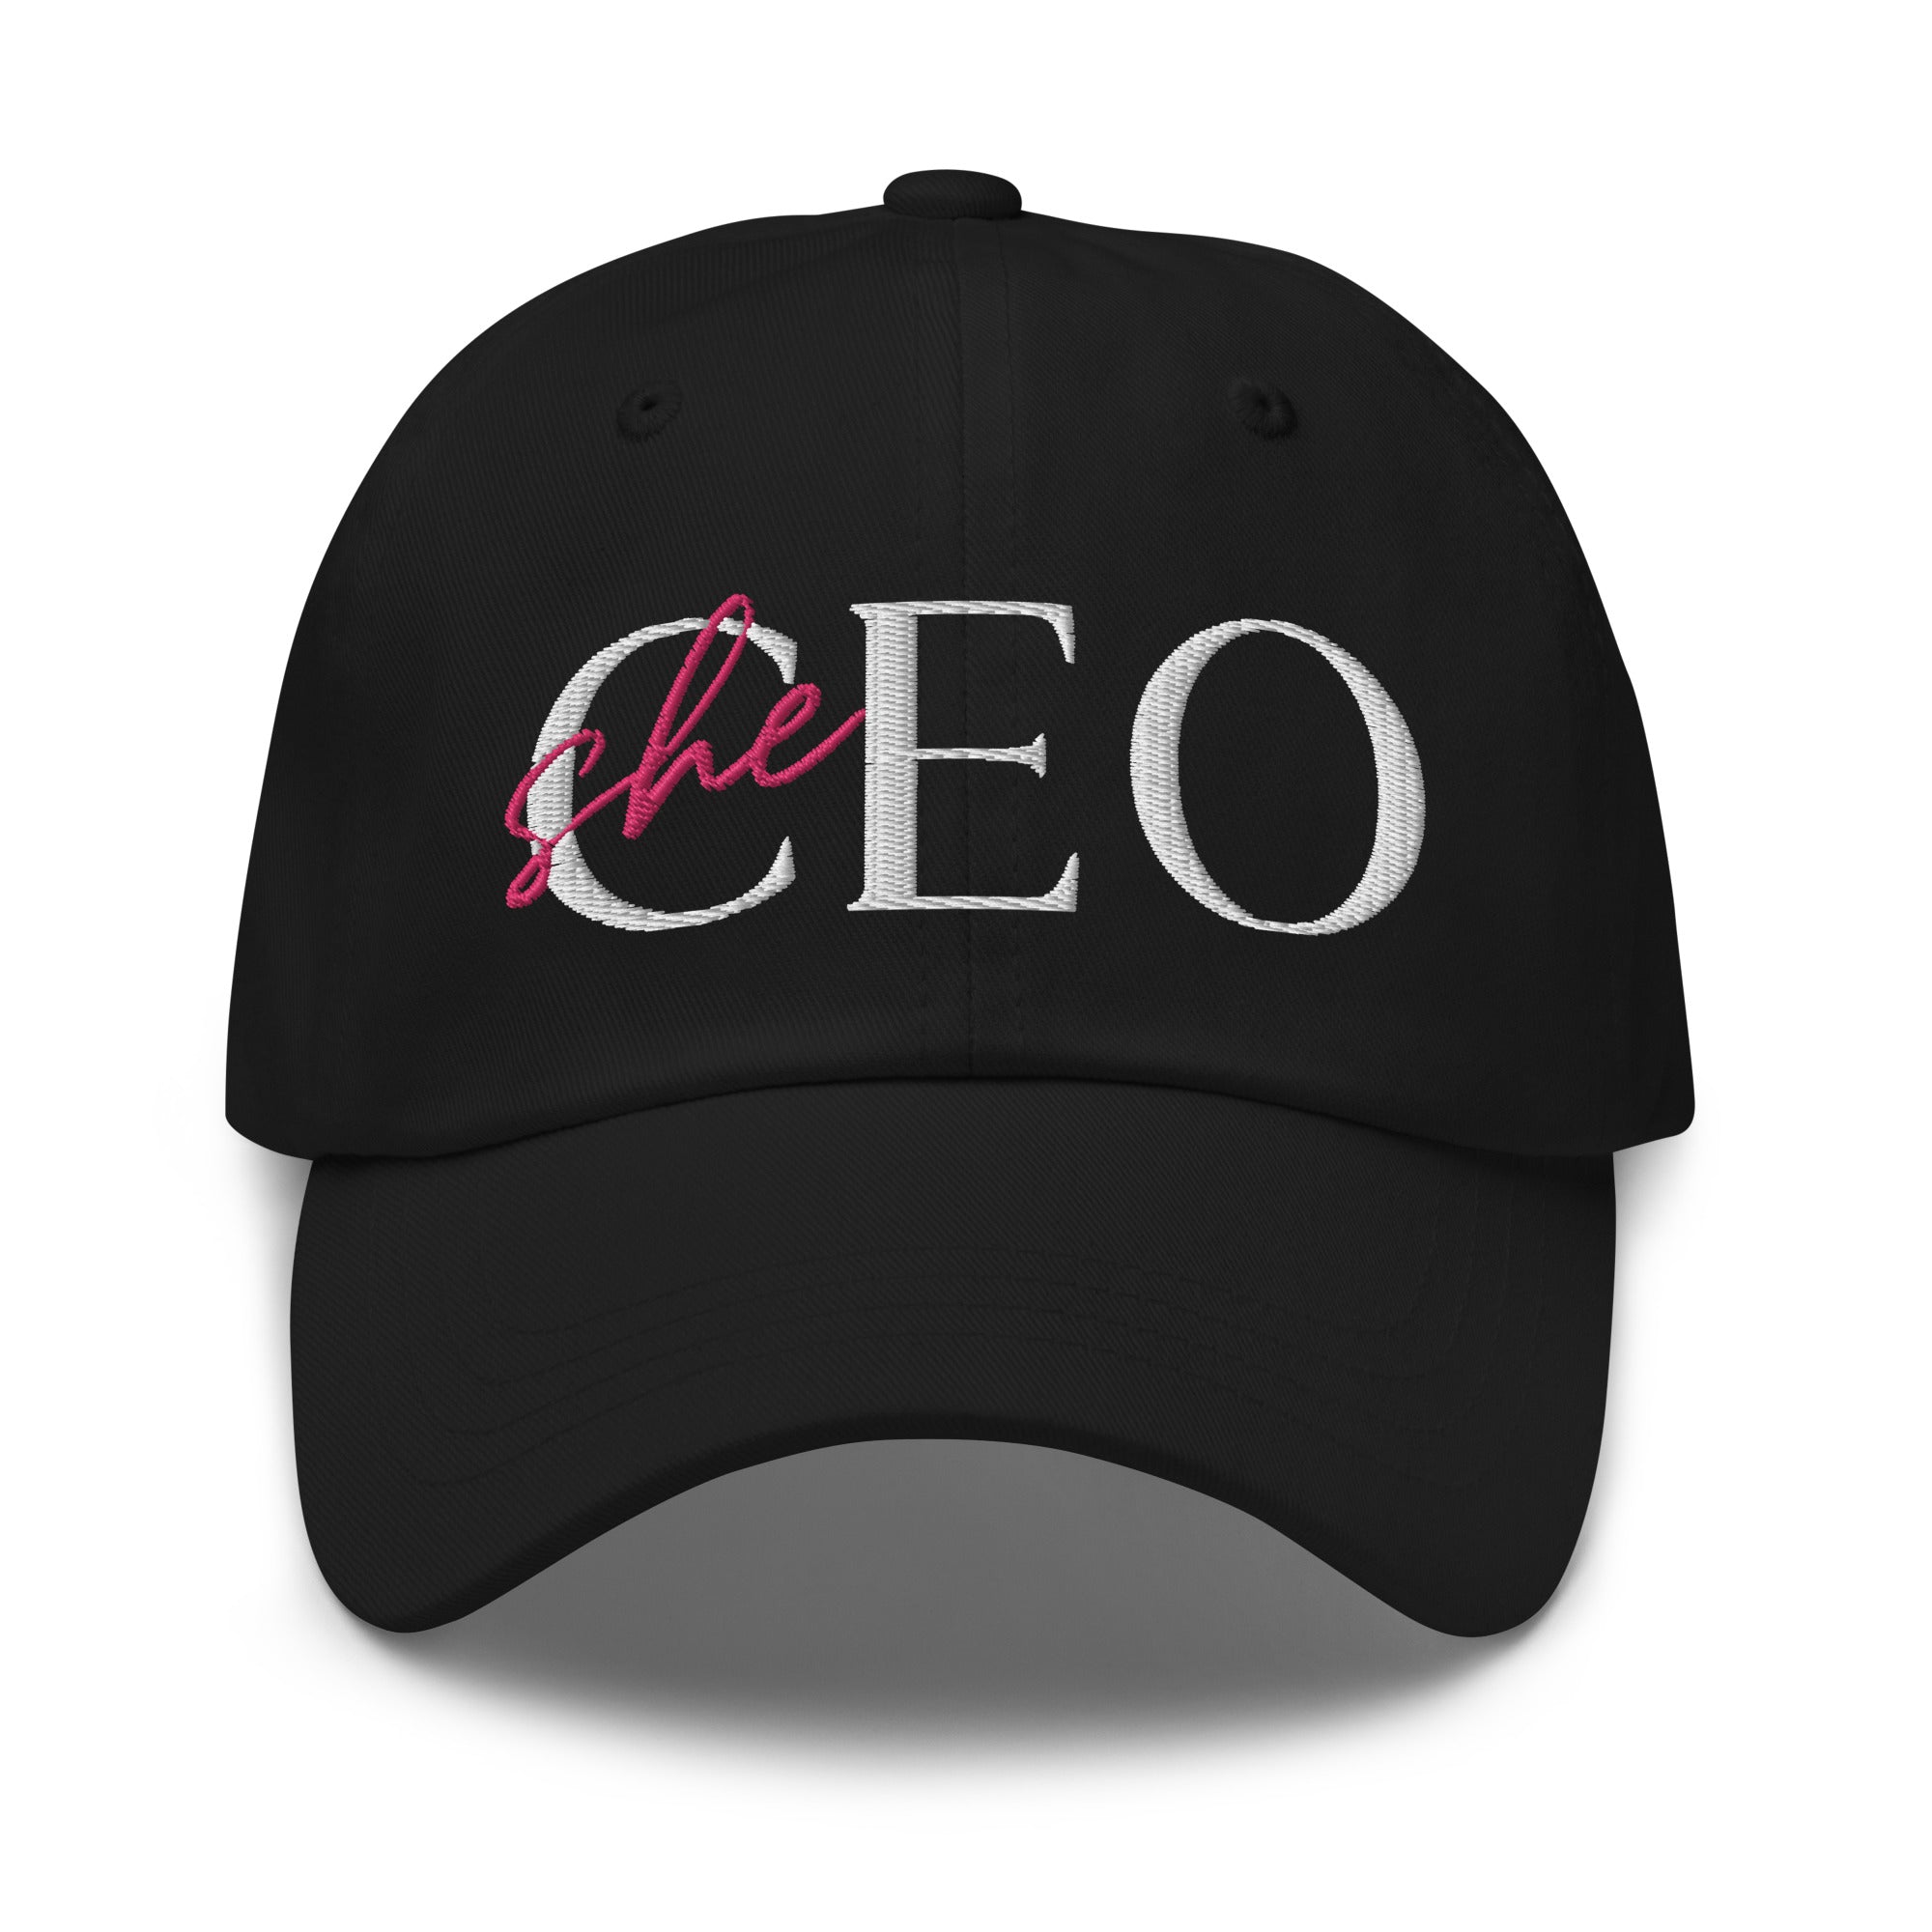 "SHE" CEO DAD HAT